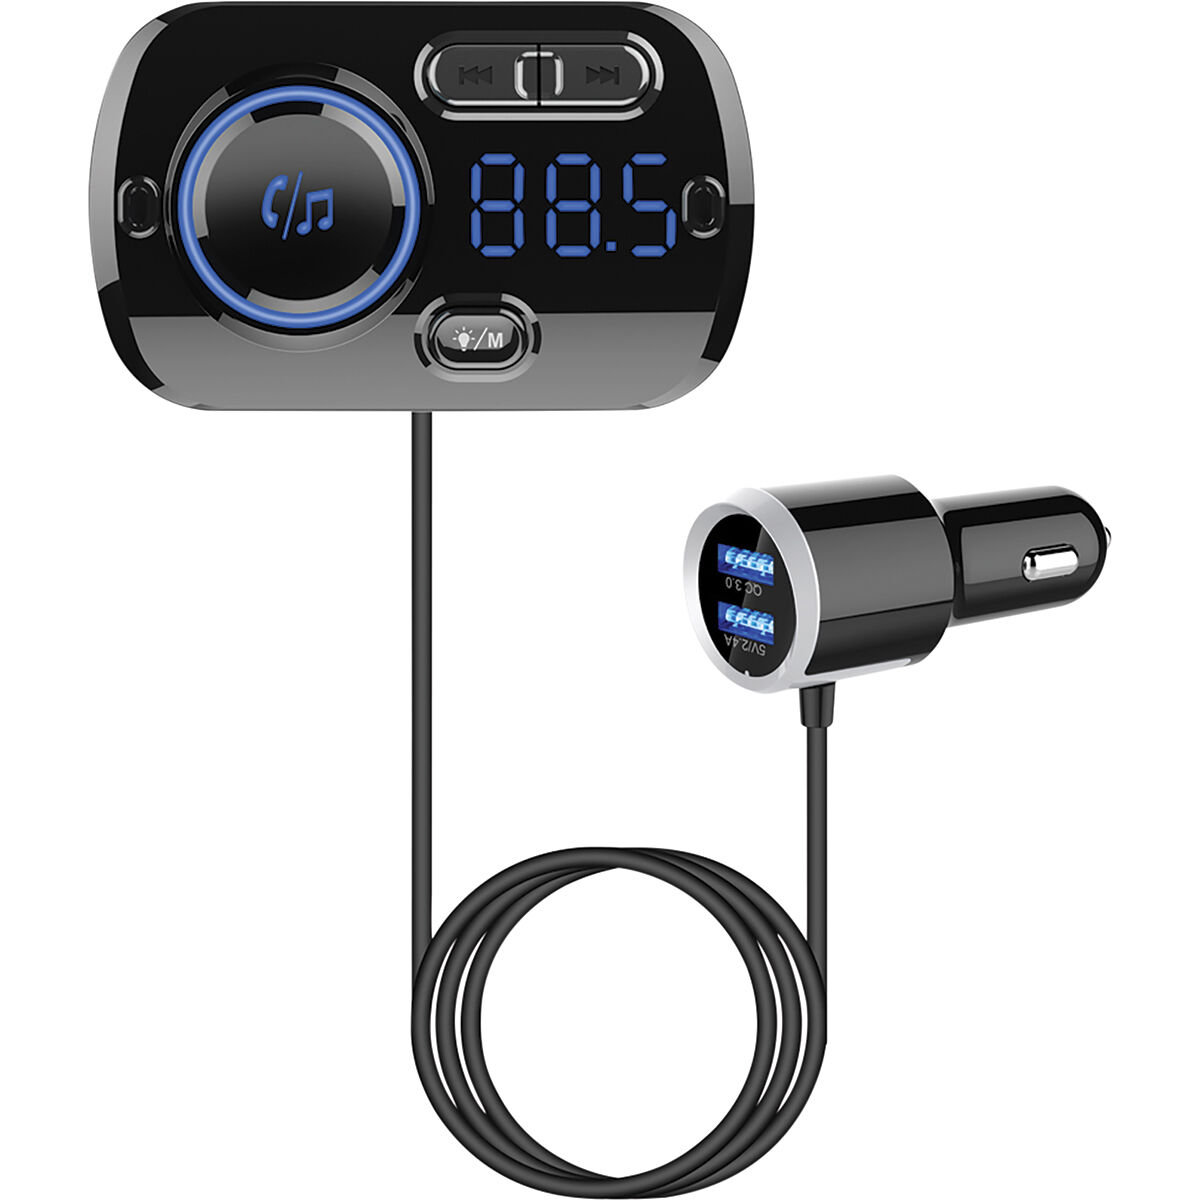 AYNCER Bluetooth V5.0 FM Transmitter for Car,Wireless Audio Adapter and Receiver,Bluetooth MP3 Car Adapter with Dual USB Ports,Supports Hands-Free Calls,TF Card,LED Backlit,Siri Google Assistant（Blue） 